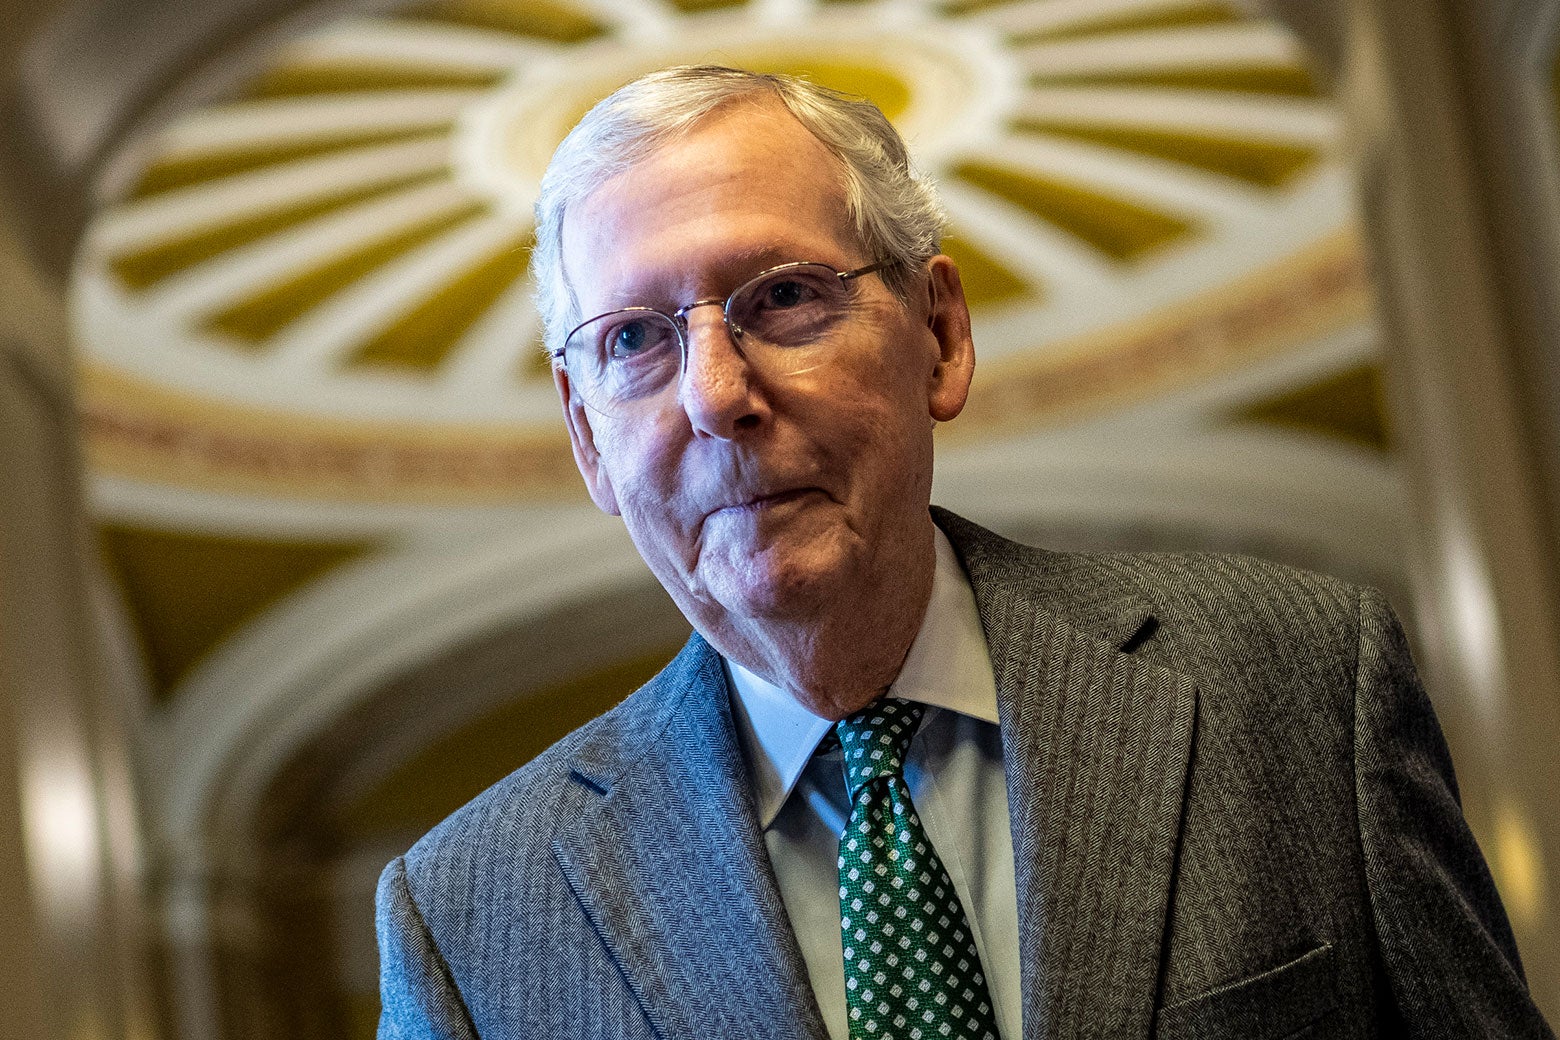 How Mitch McConnell Destroyed the Independent Federal Judiciary Dahlia Lithwick and Mark Joseph Stern